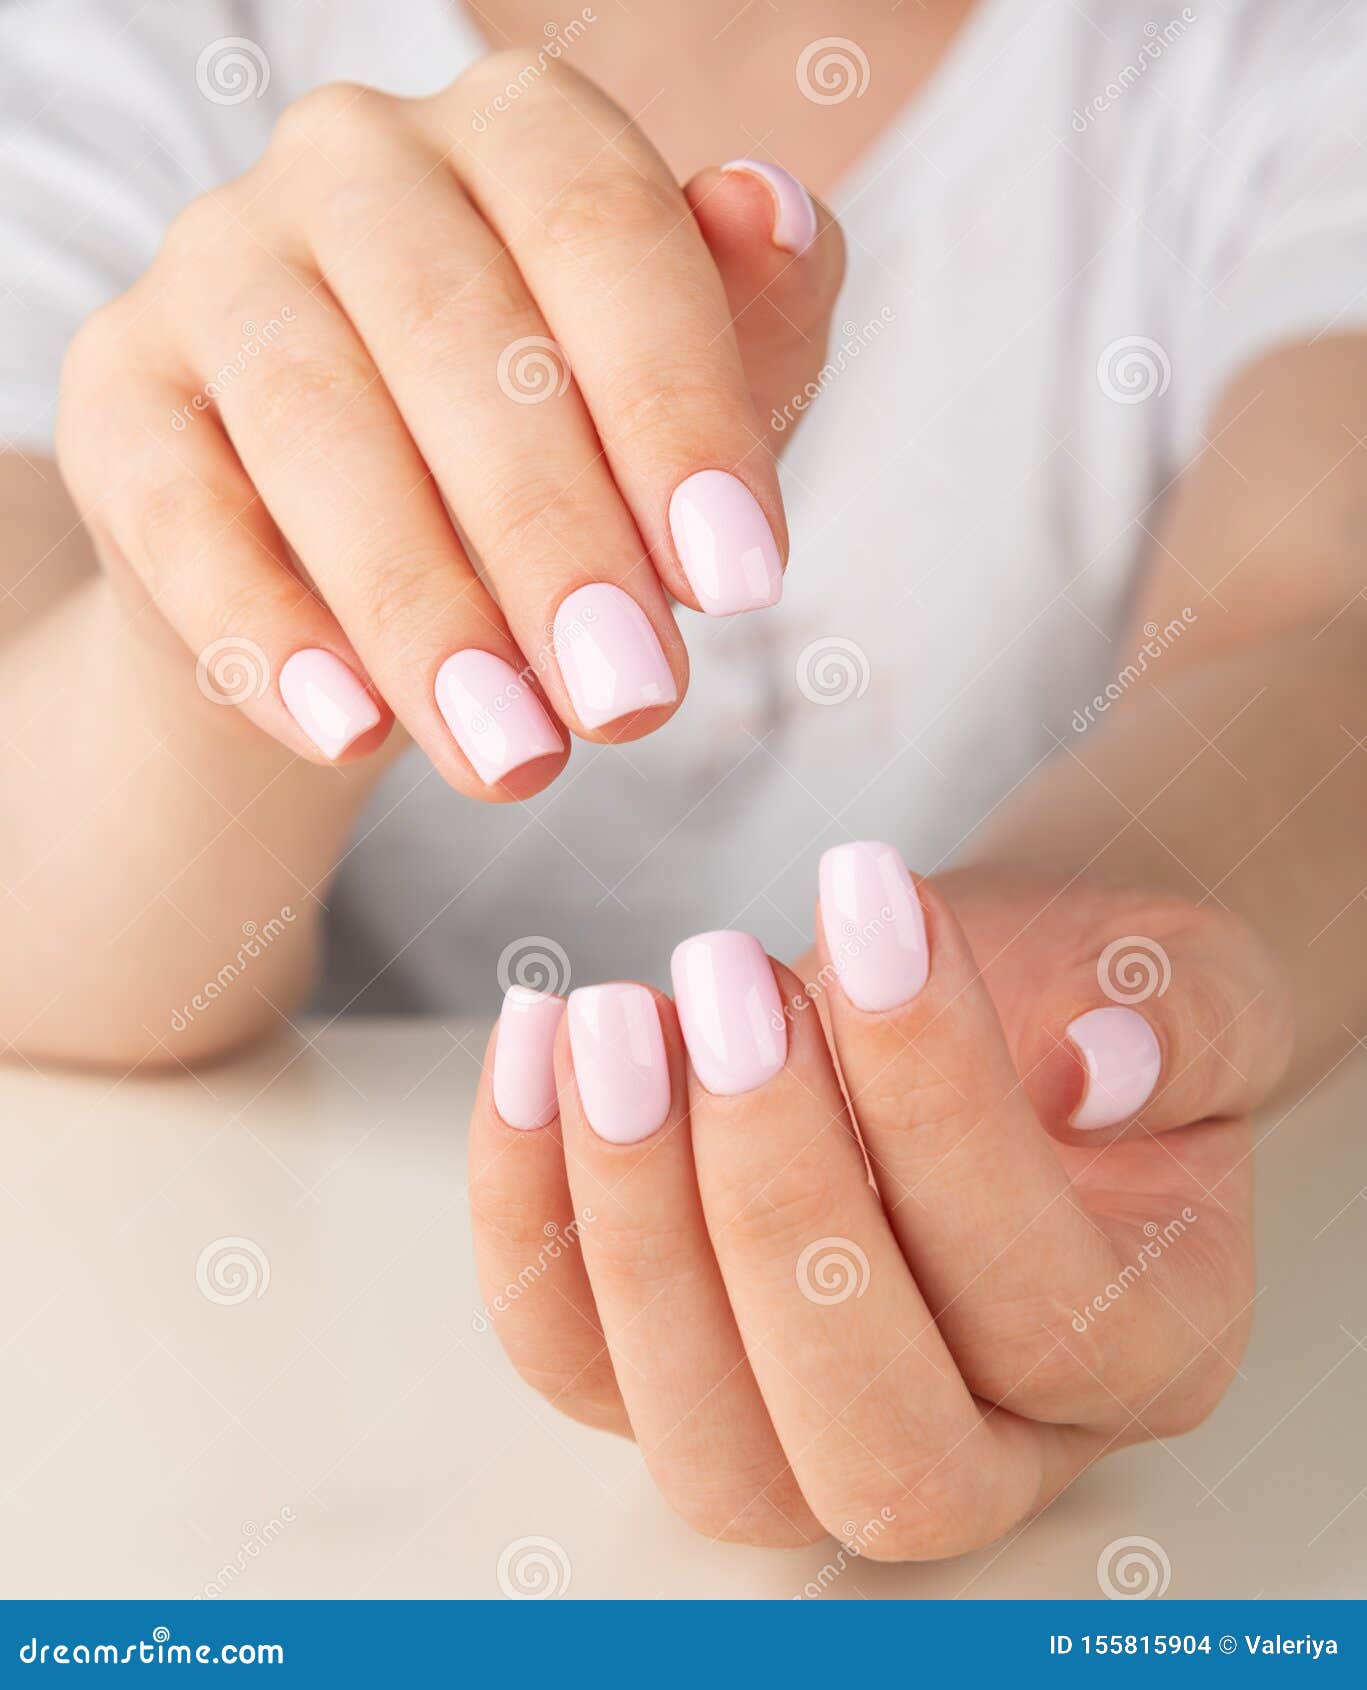 Female Hand with Light Pink Nail Design Stock Photo - Image of ...